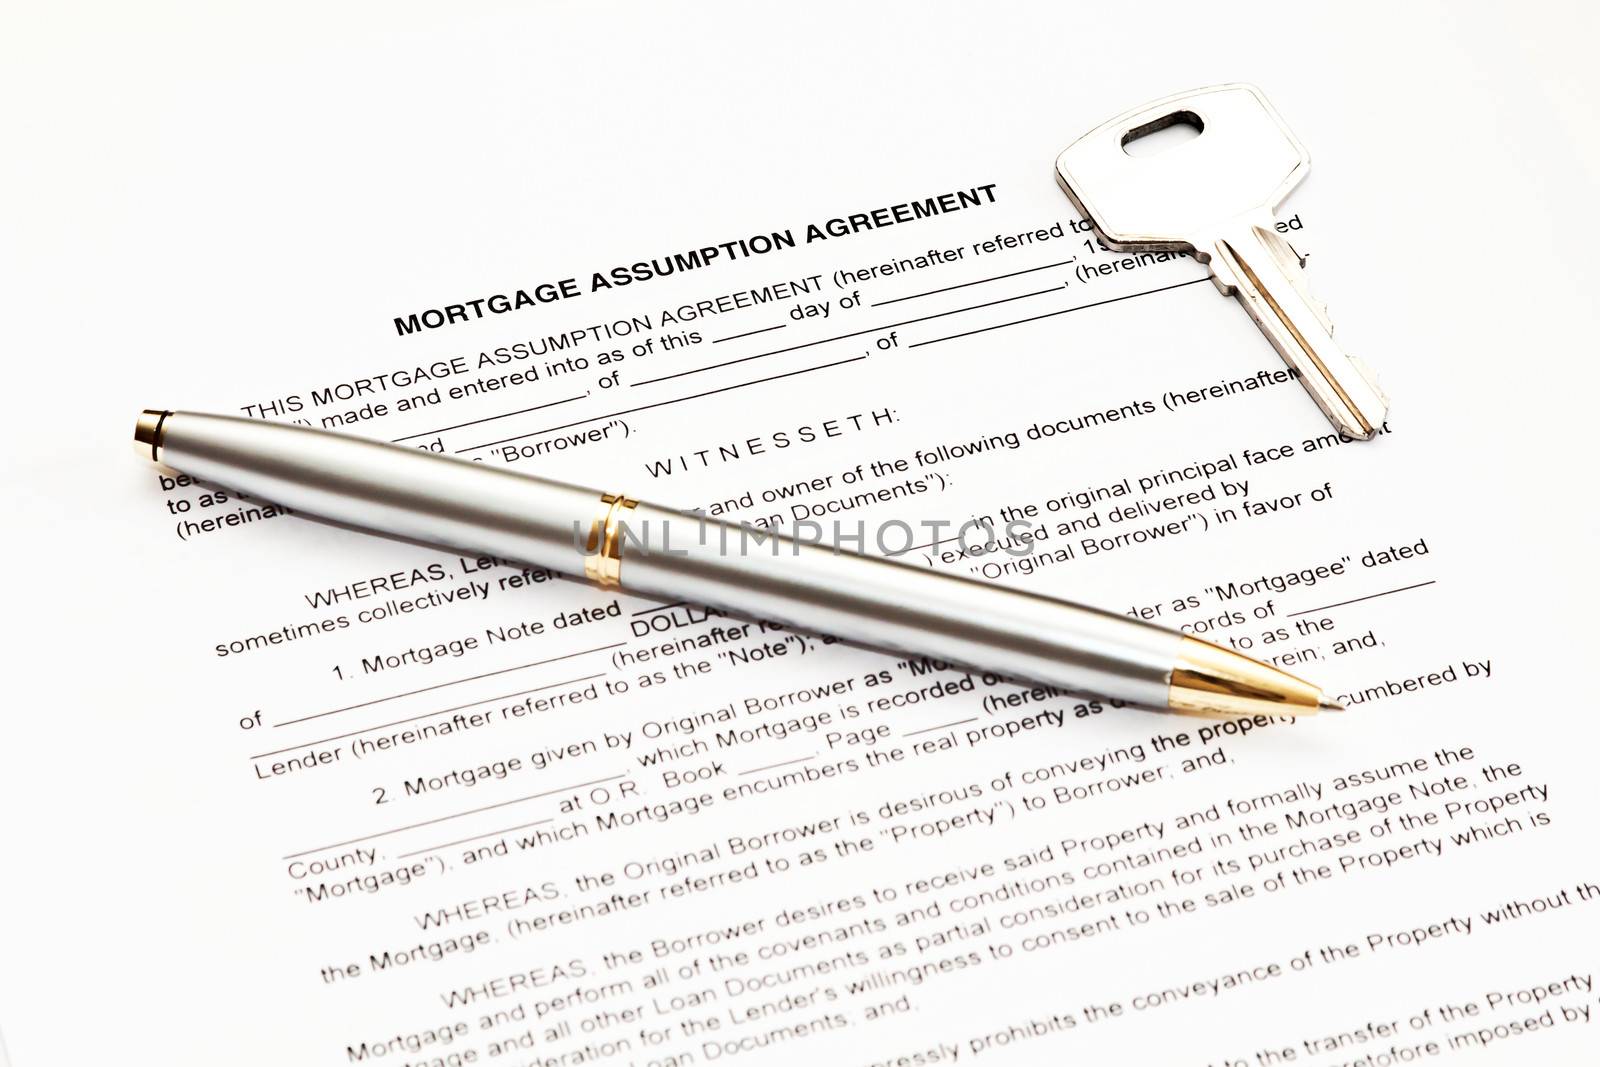 Mortgage assumption agreement with a pen for signature and a key
